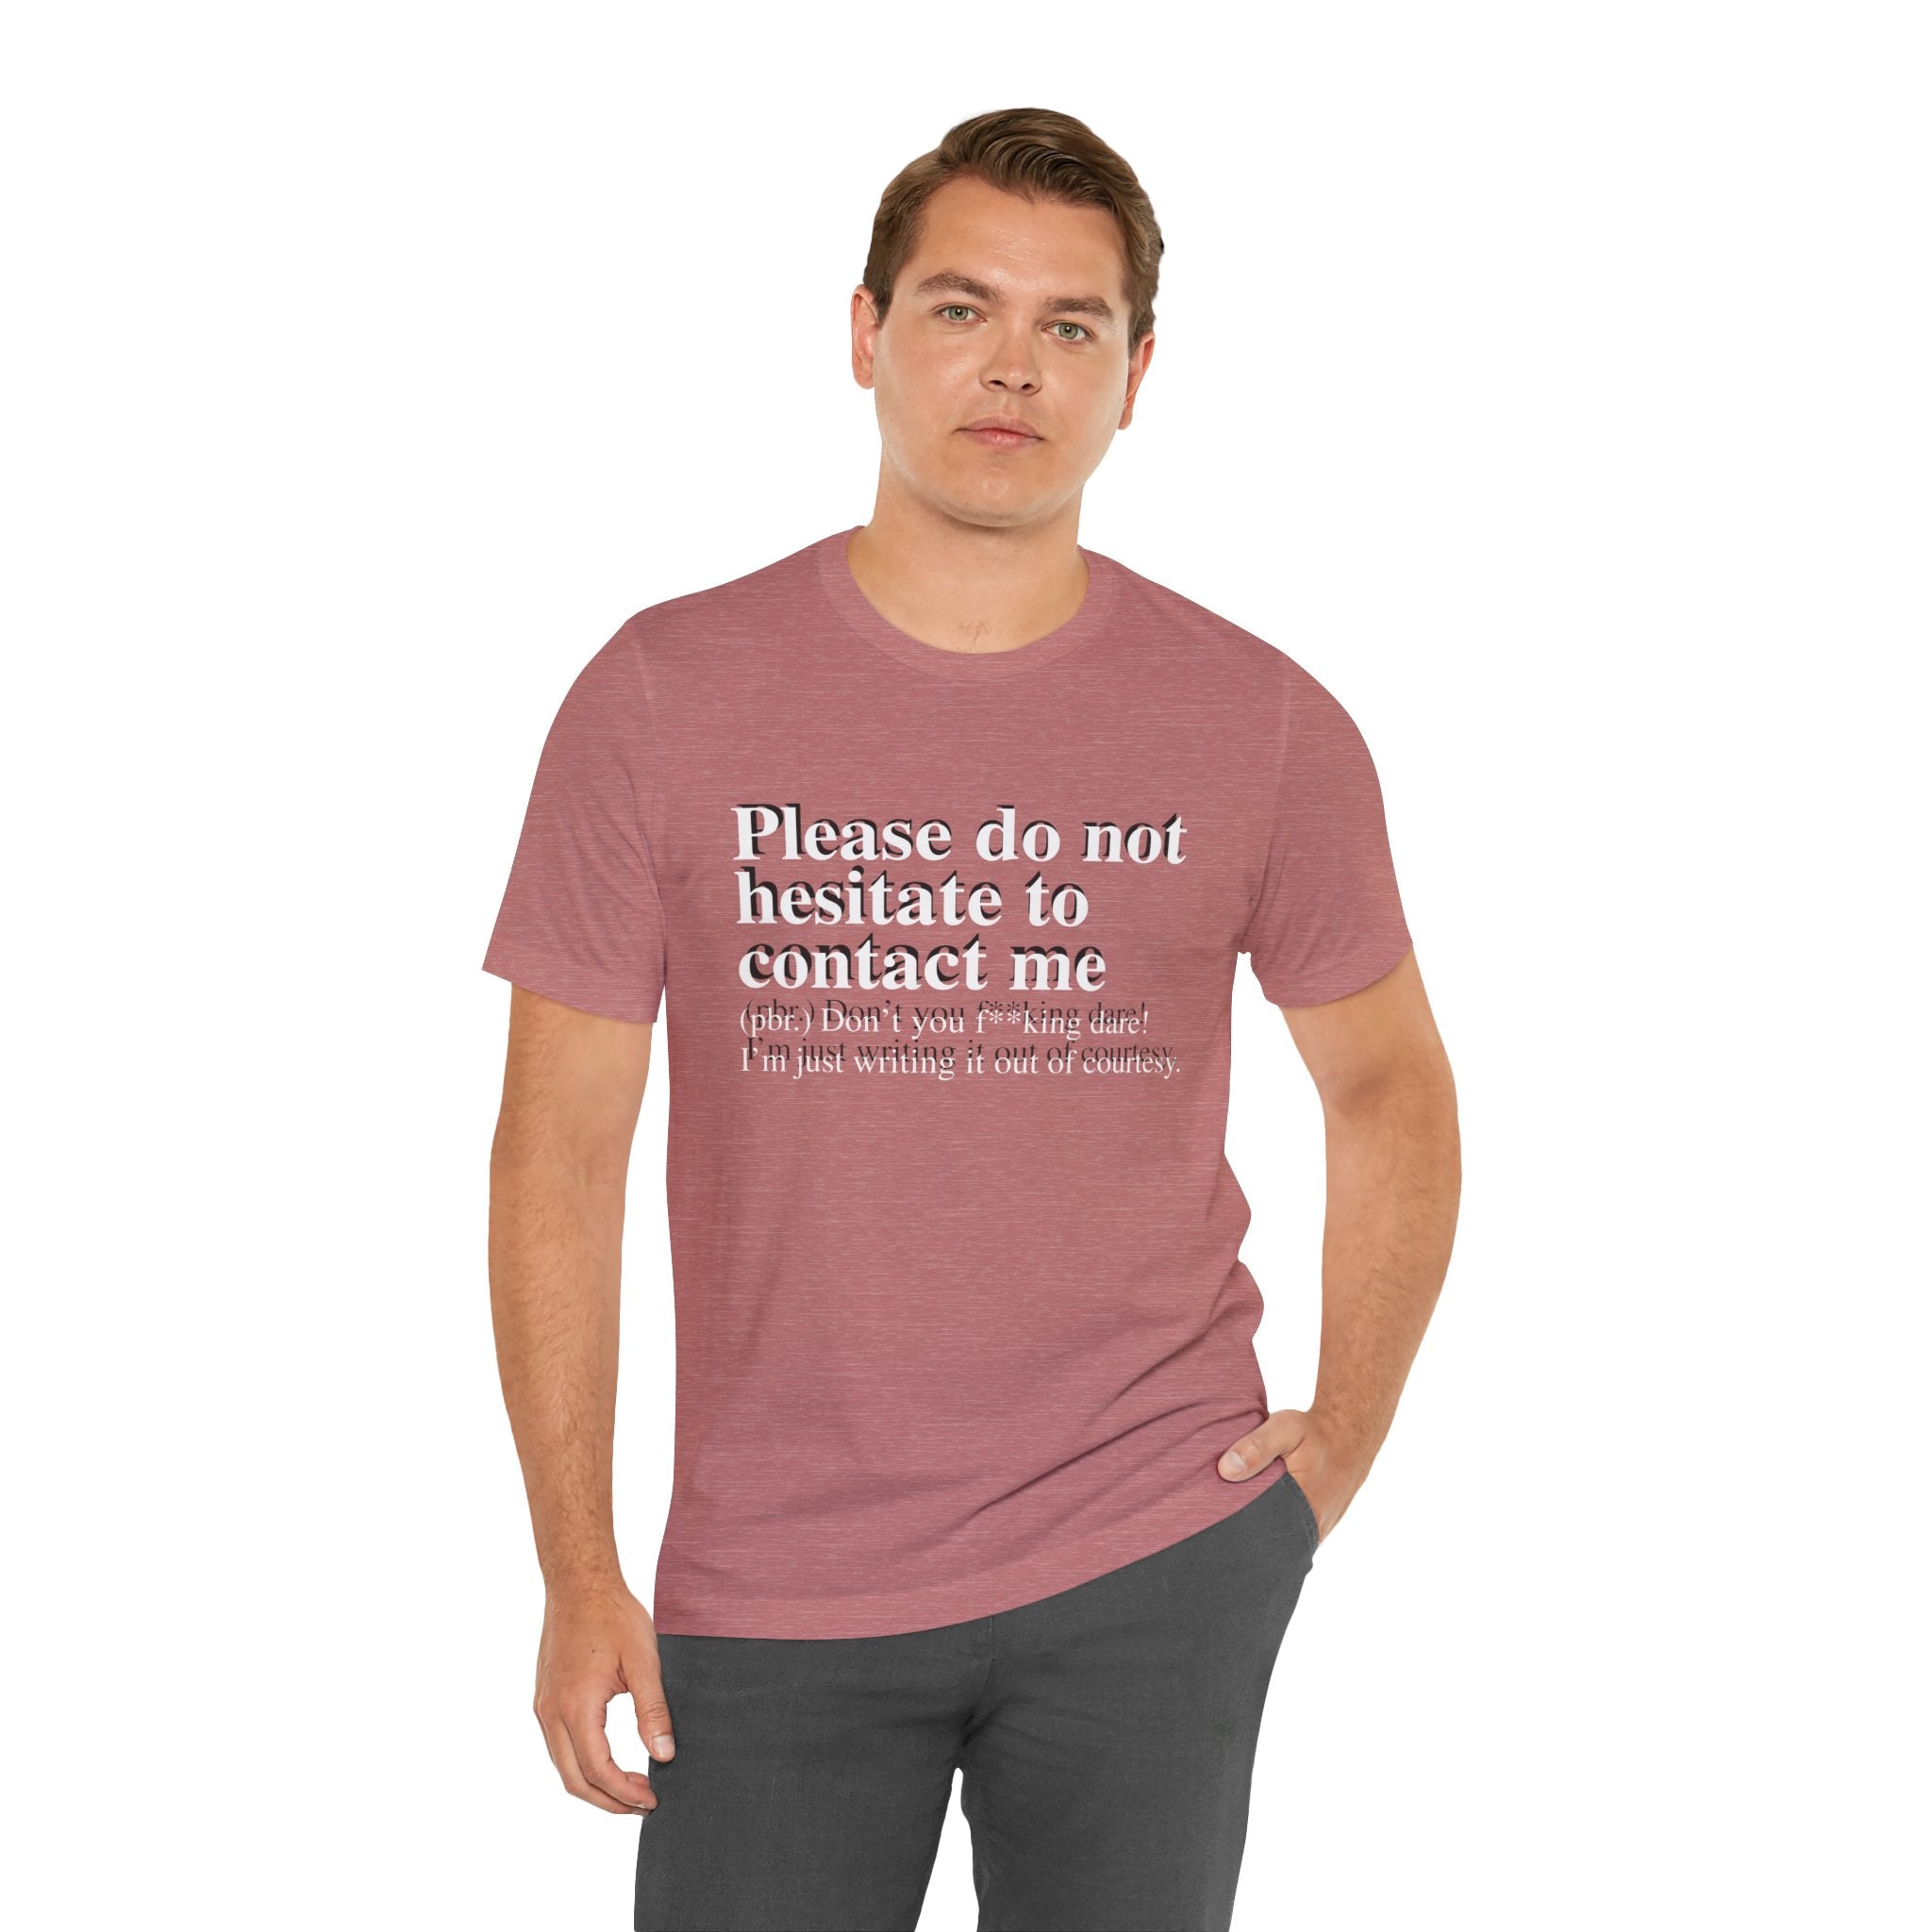 Man wearing a maroon unisex Please Do Not Hesitate to Contact Me T-Shirt with text: "please do not hesitate to contact me (lol) but at a time convenient for me please i’m just whining cuz i’m out